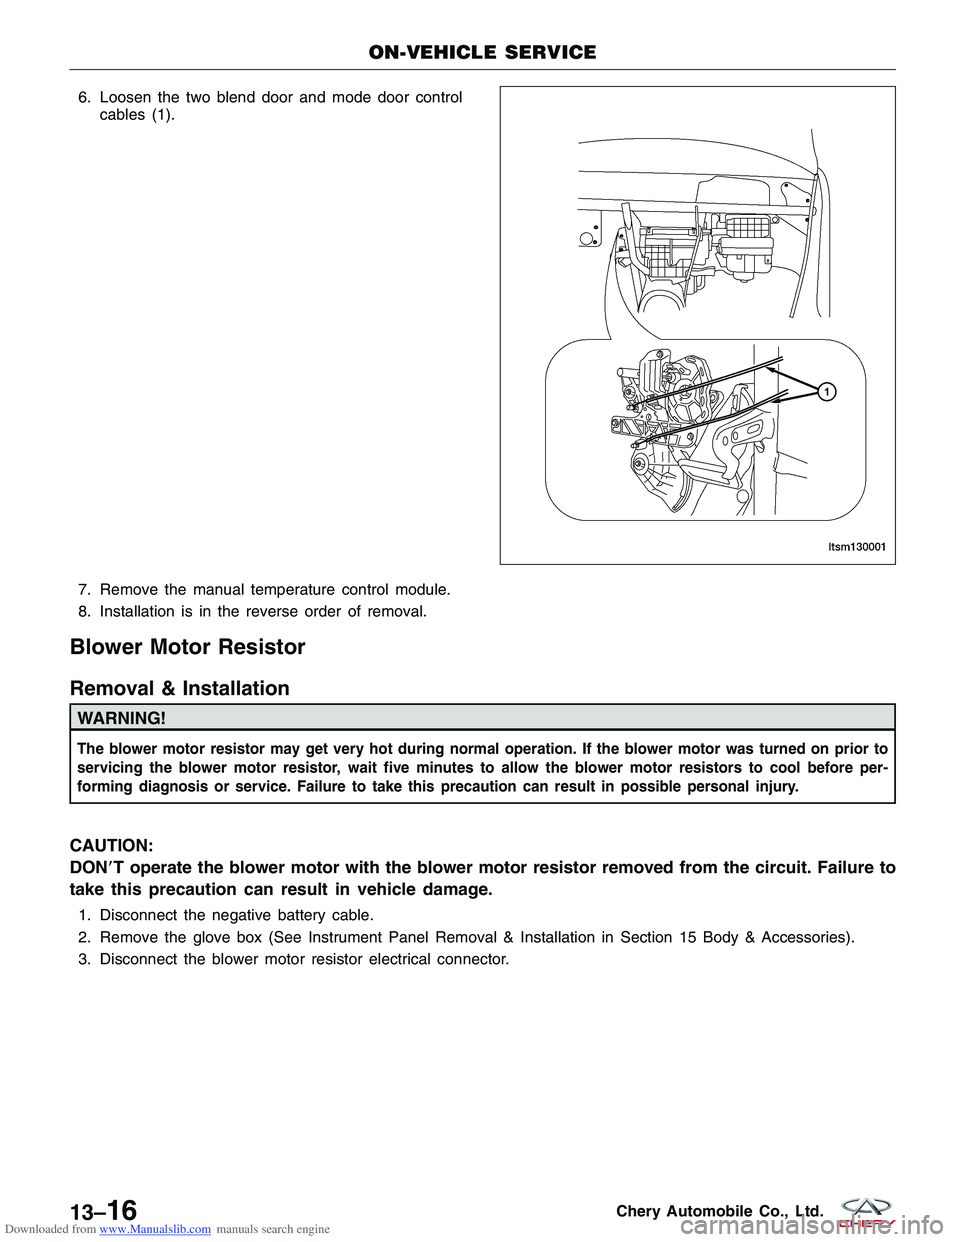 CHERY TIGGO 2009  Service Repair Manual Downloaded from www.Manualslib.com manuals search engine 6. Loosen the two blend door and mode door controlcables (1).
7. Remove the manual temperature control module.
8. Installation is in the revers